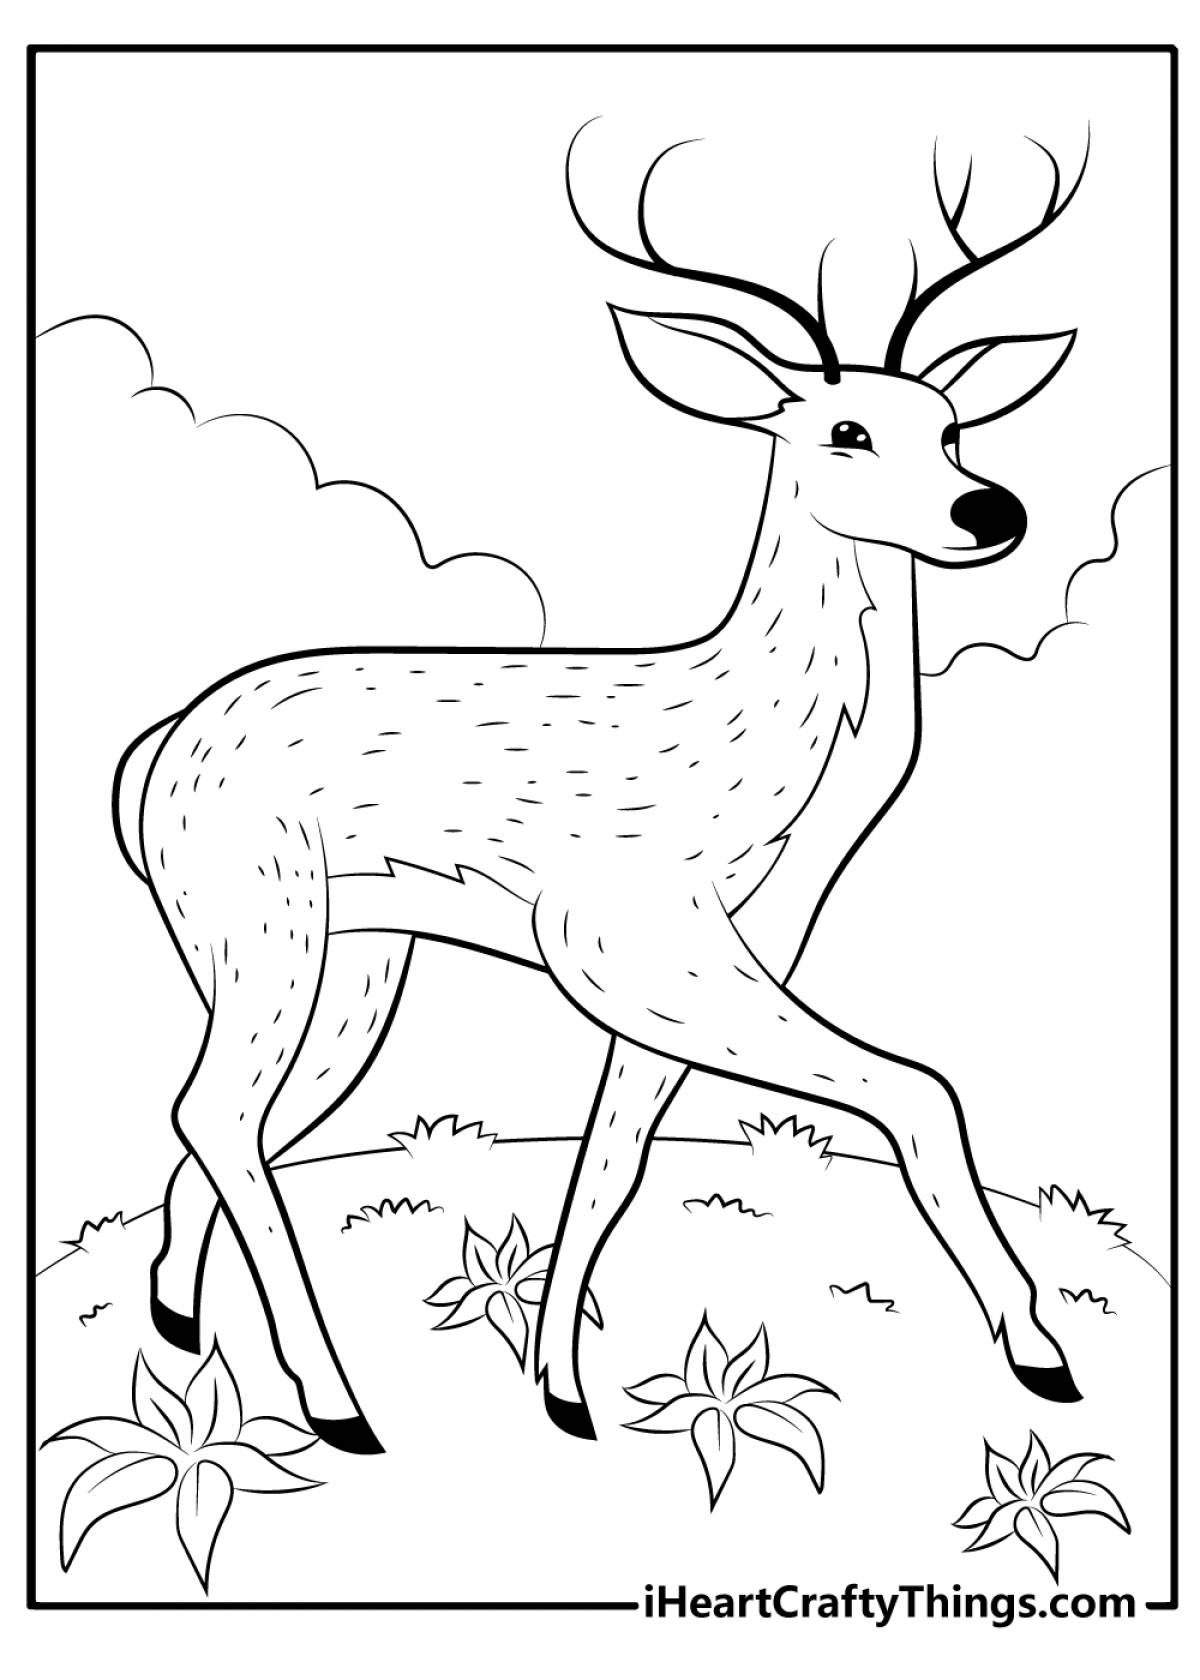 Coloring book exalted deer for children 6-7 years old